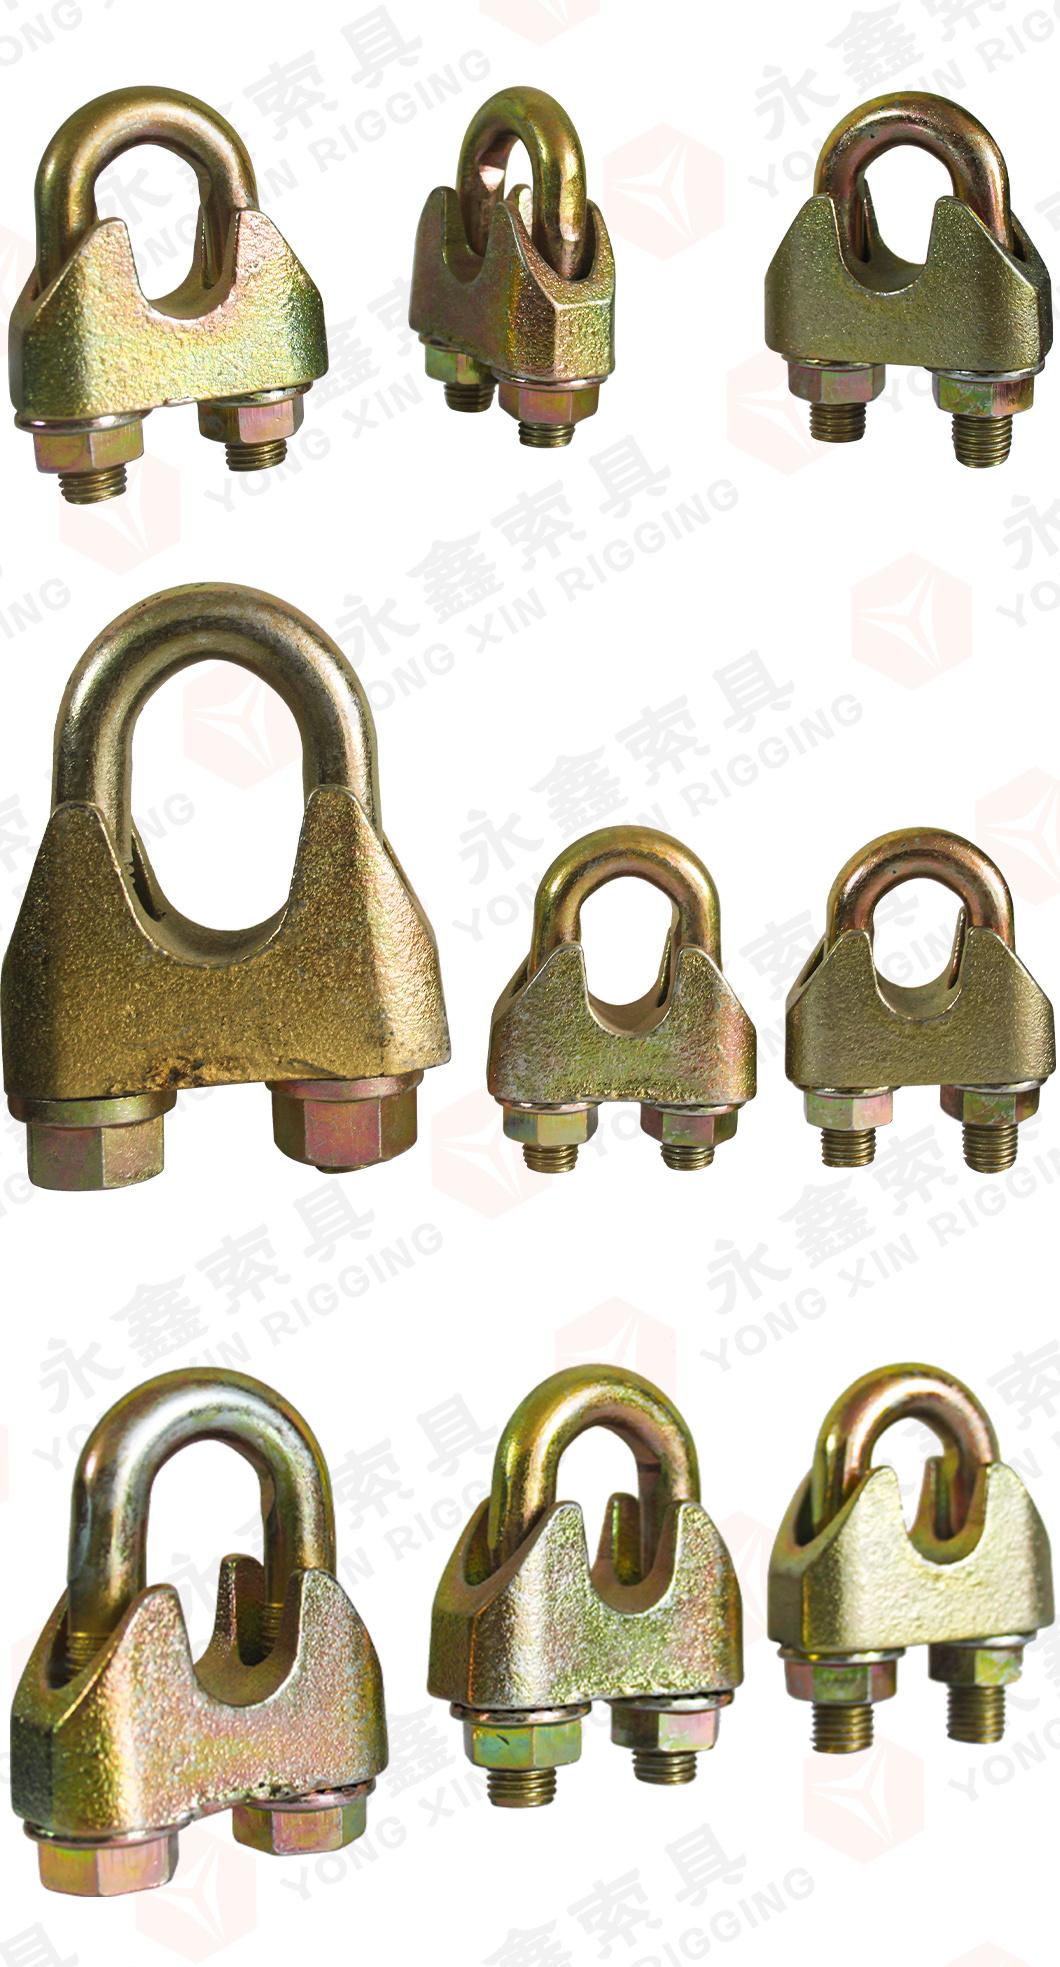 China Made Low Price Strong Us G450 DIN741 DIN1142 B Type Malleable Simple Triple Fist Grip Duplex Wire Rope Clip